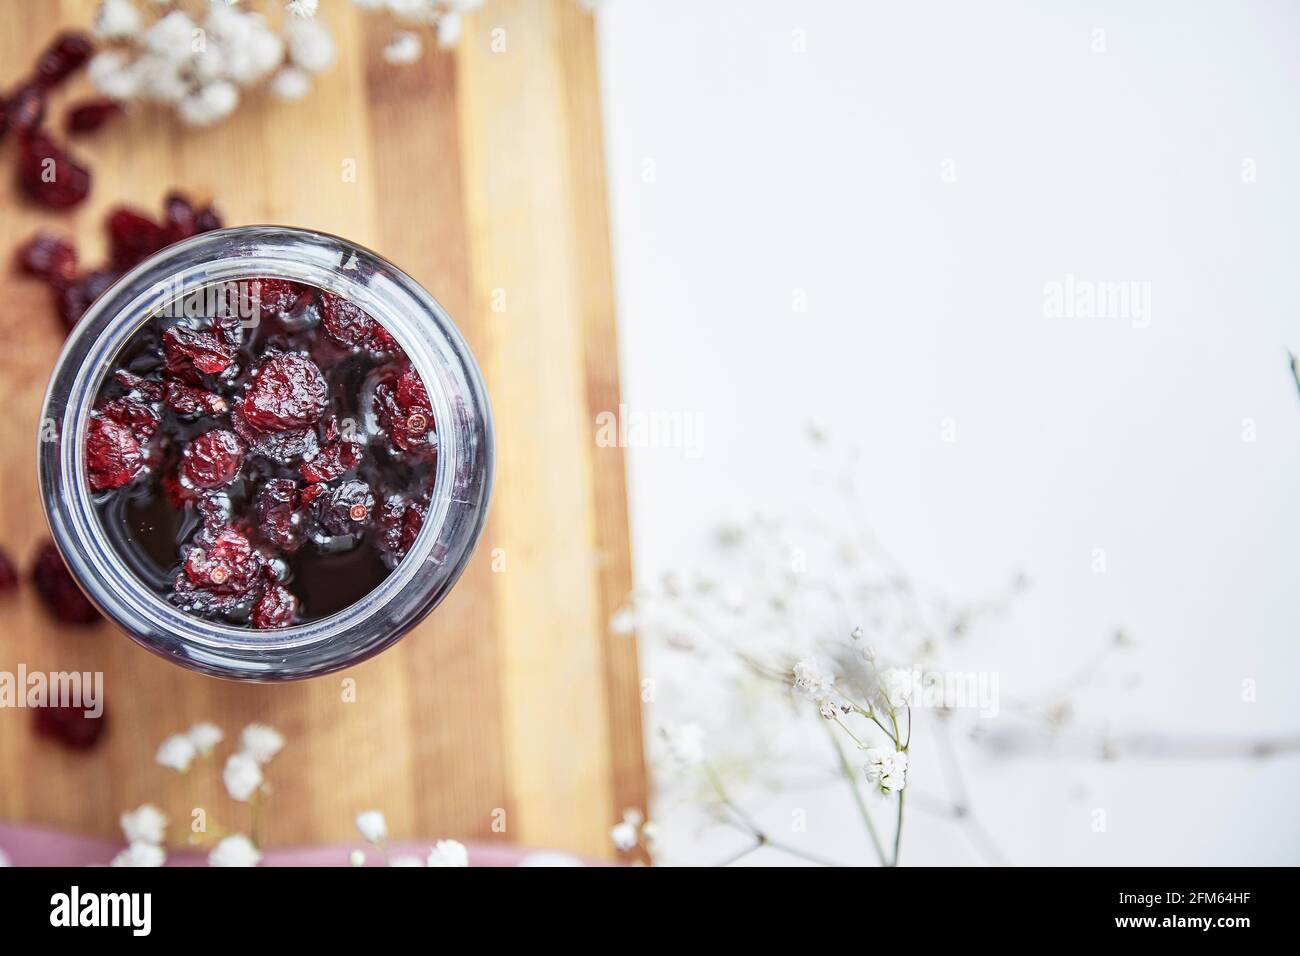 Healthy fermented honey product with cranberry, probiotics. Food preservative. Delicious recipe concept. Anti-viral food. Top view. Decoration with gypsophila flower. Copy space Stock Photo